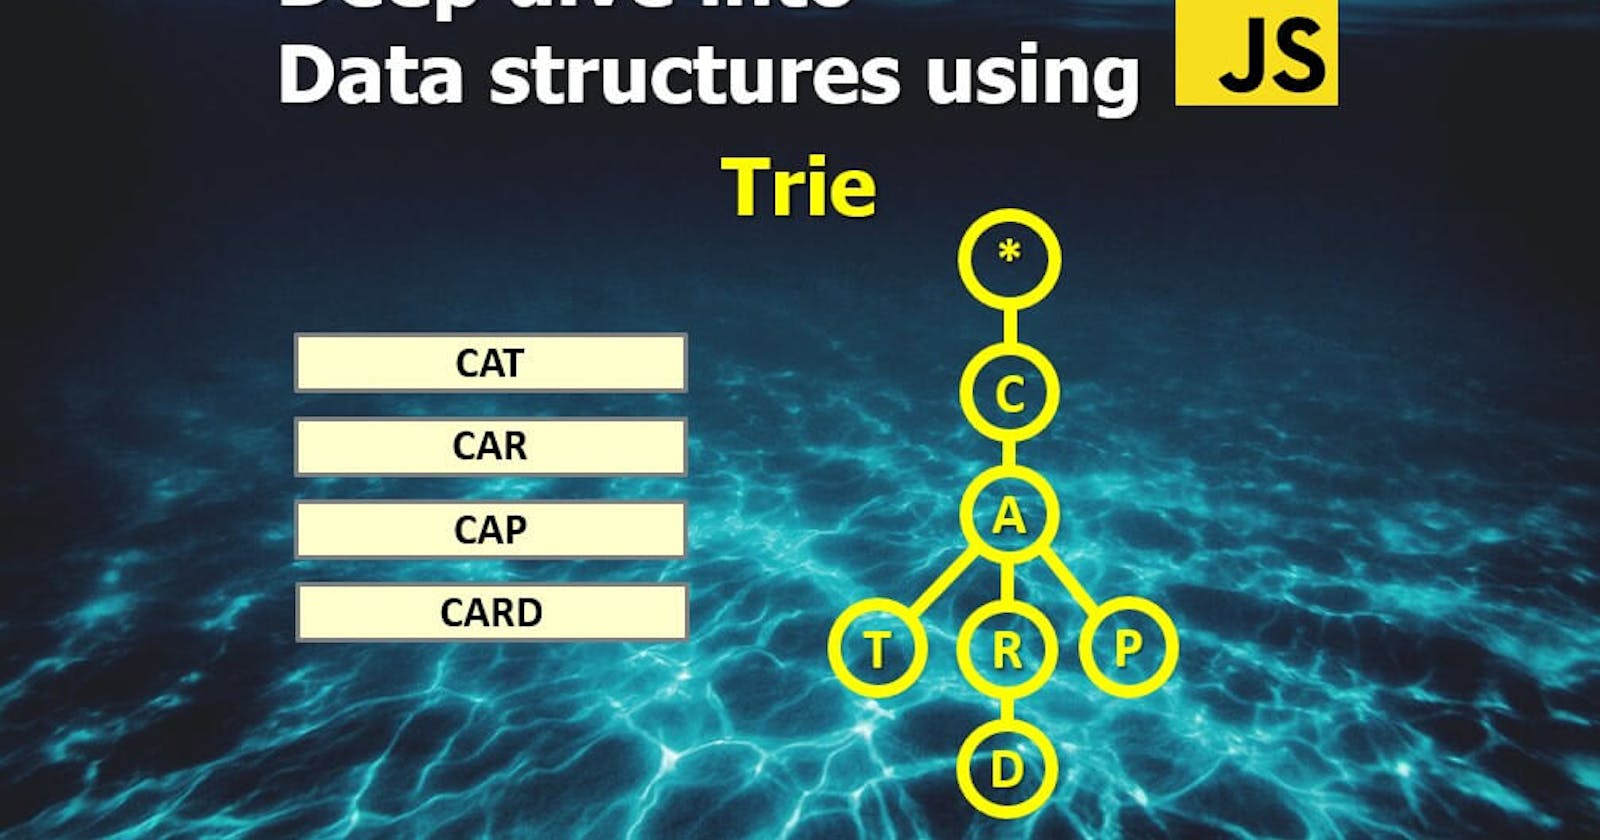 Deep Dive into Data structures using Javascript - Trie